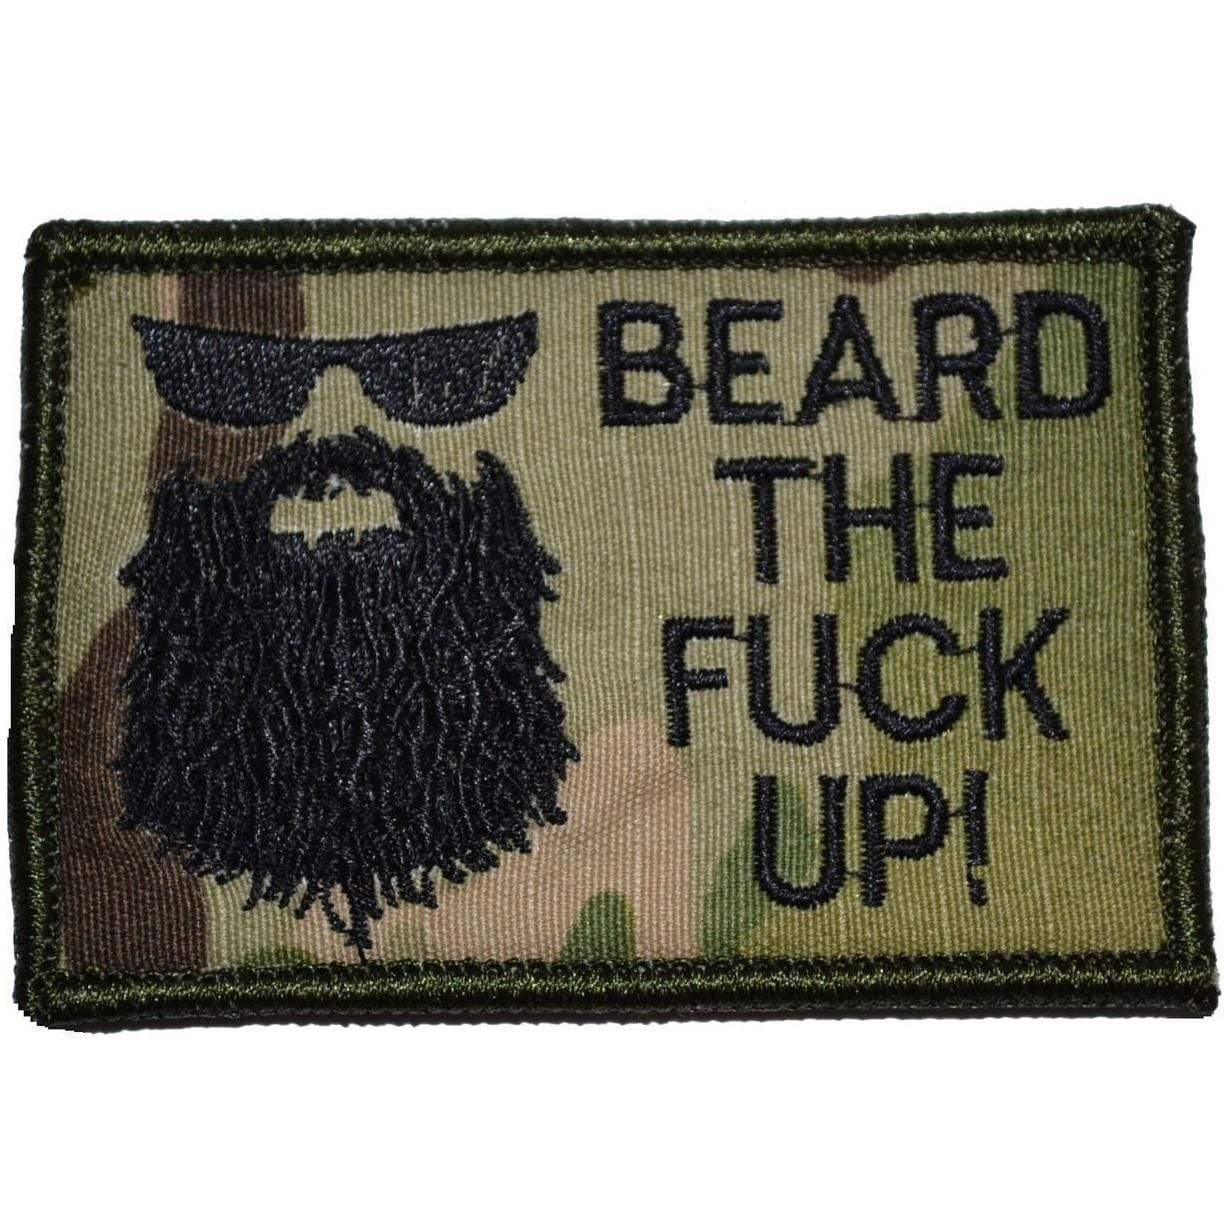 Tactical Gear Junkie Patches MultiCam Beard the Fuck Up - 2x3 Patch